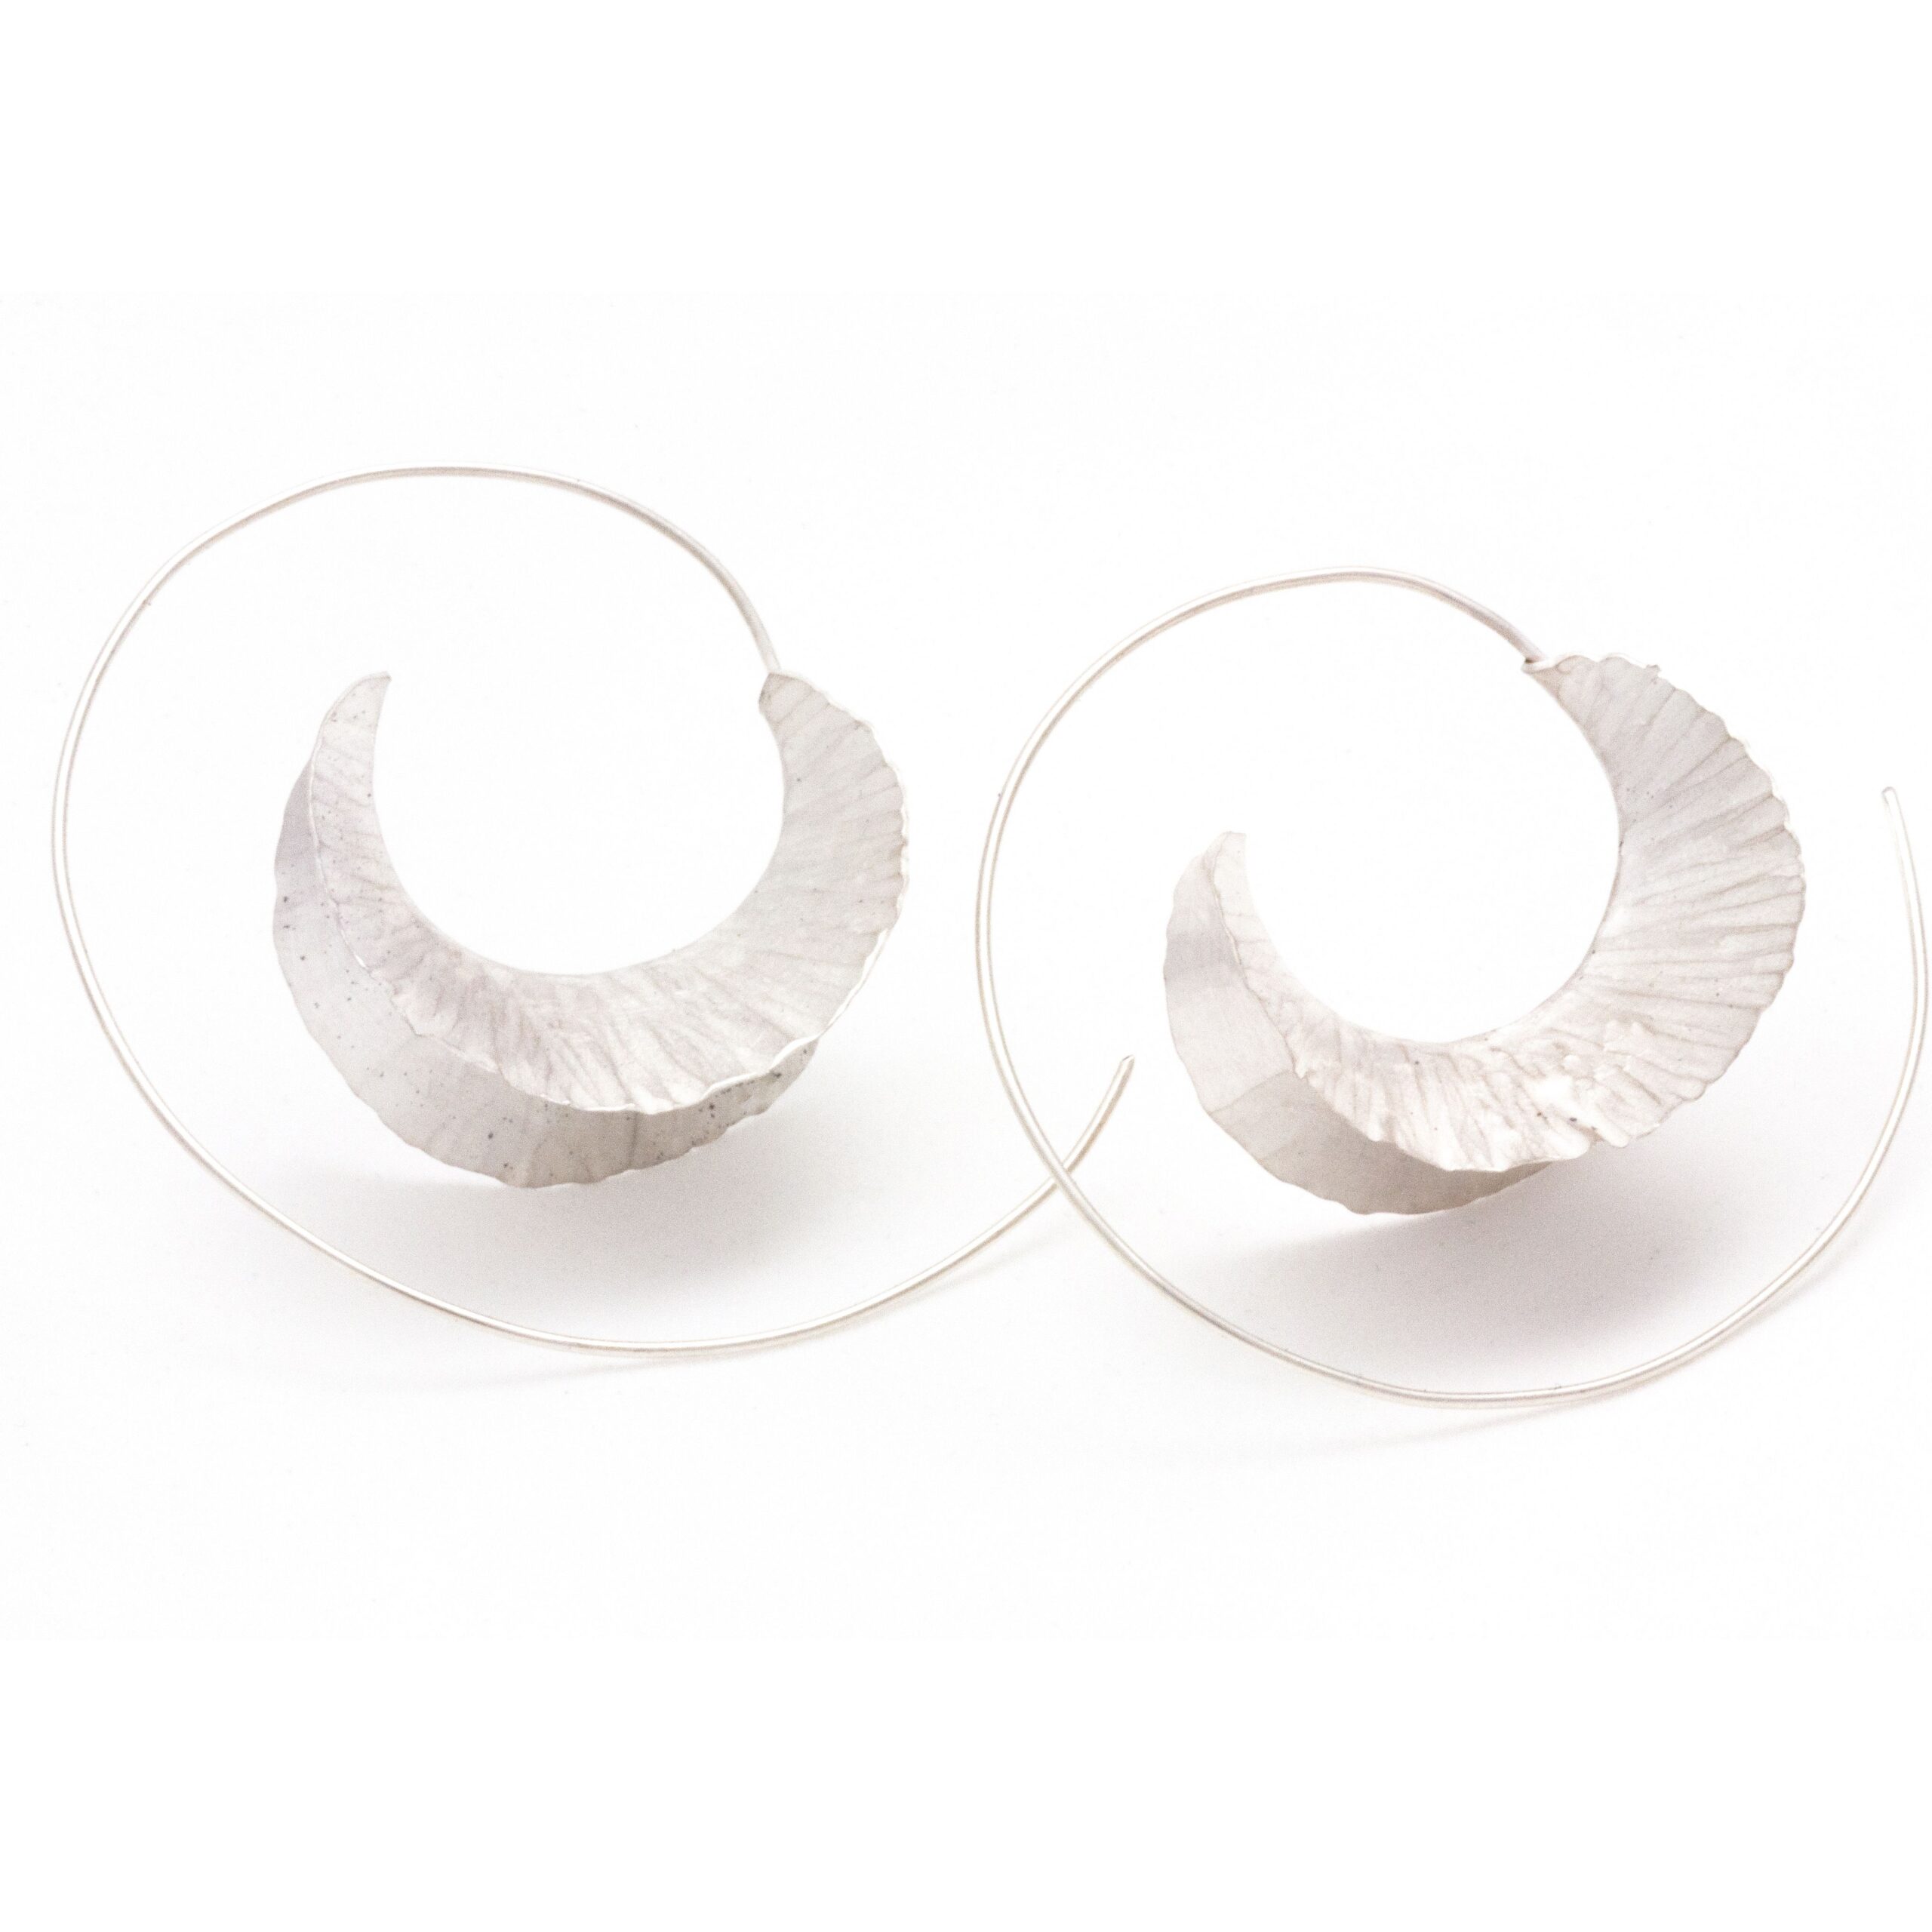 Claudine Moncion: Forge Small Earrings Silver Product Image 1 of 1